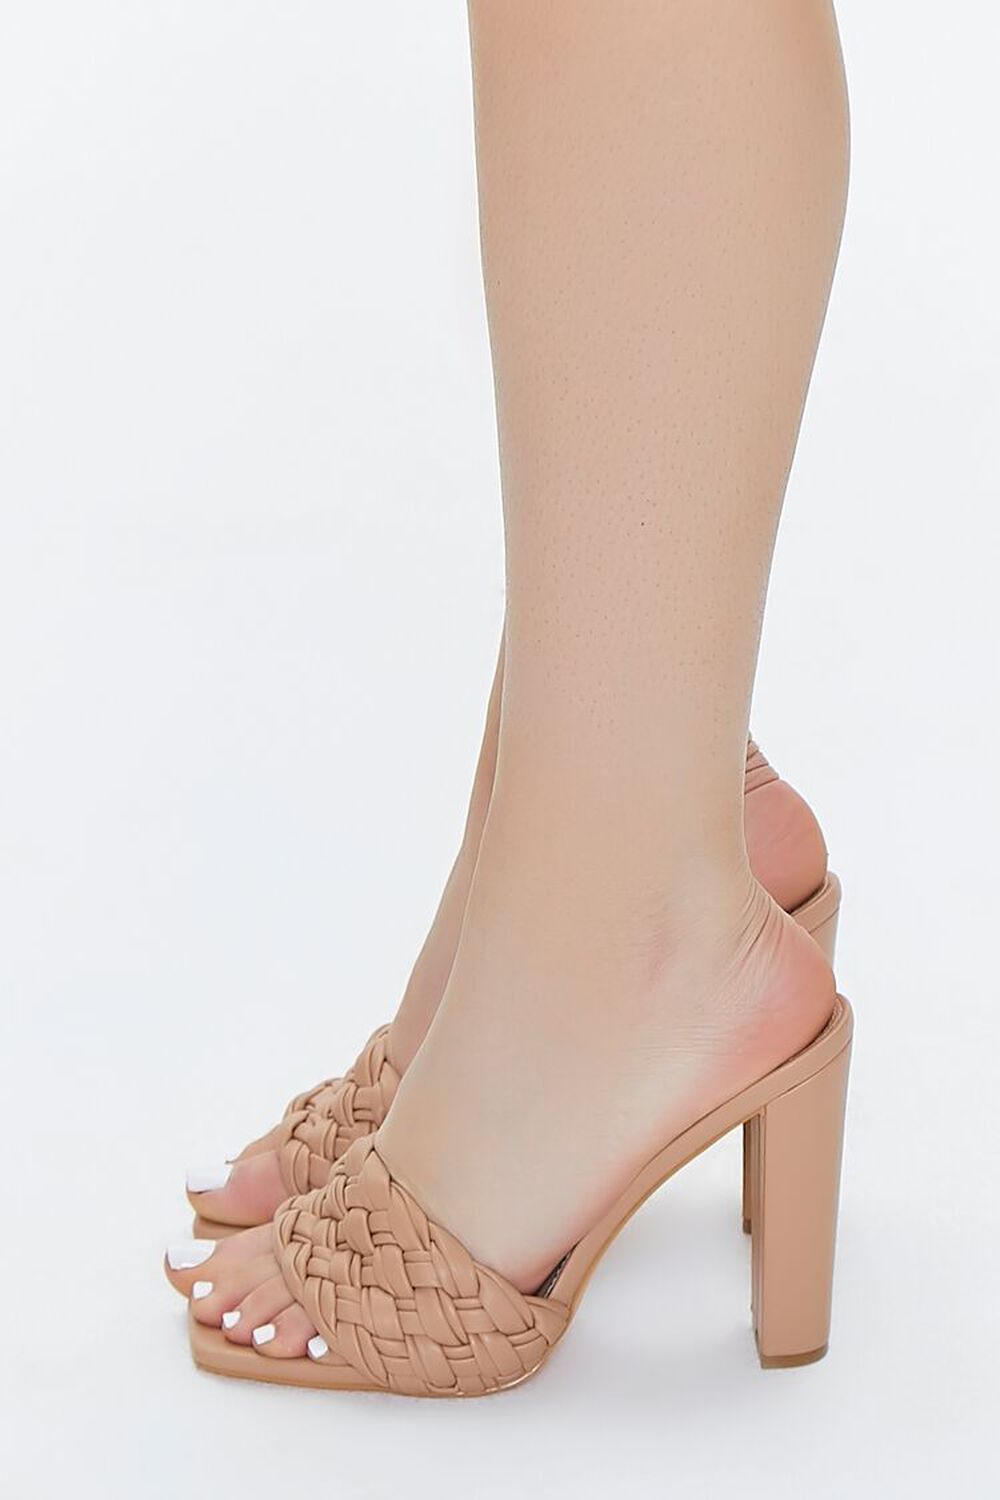 NUDE Braided Faux Leather Block Heels, image 2